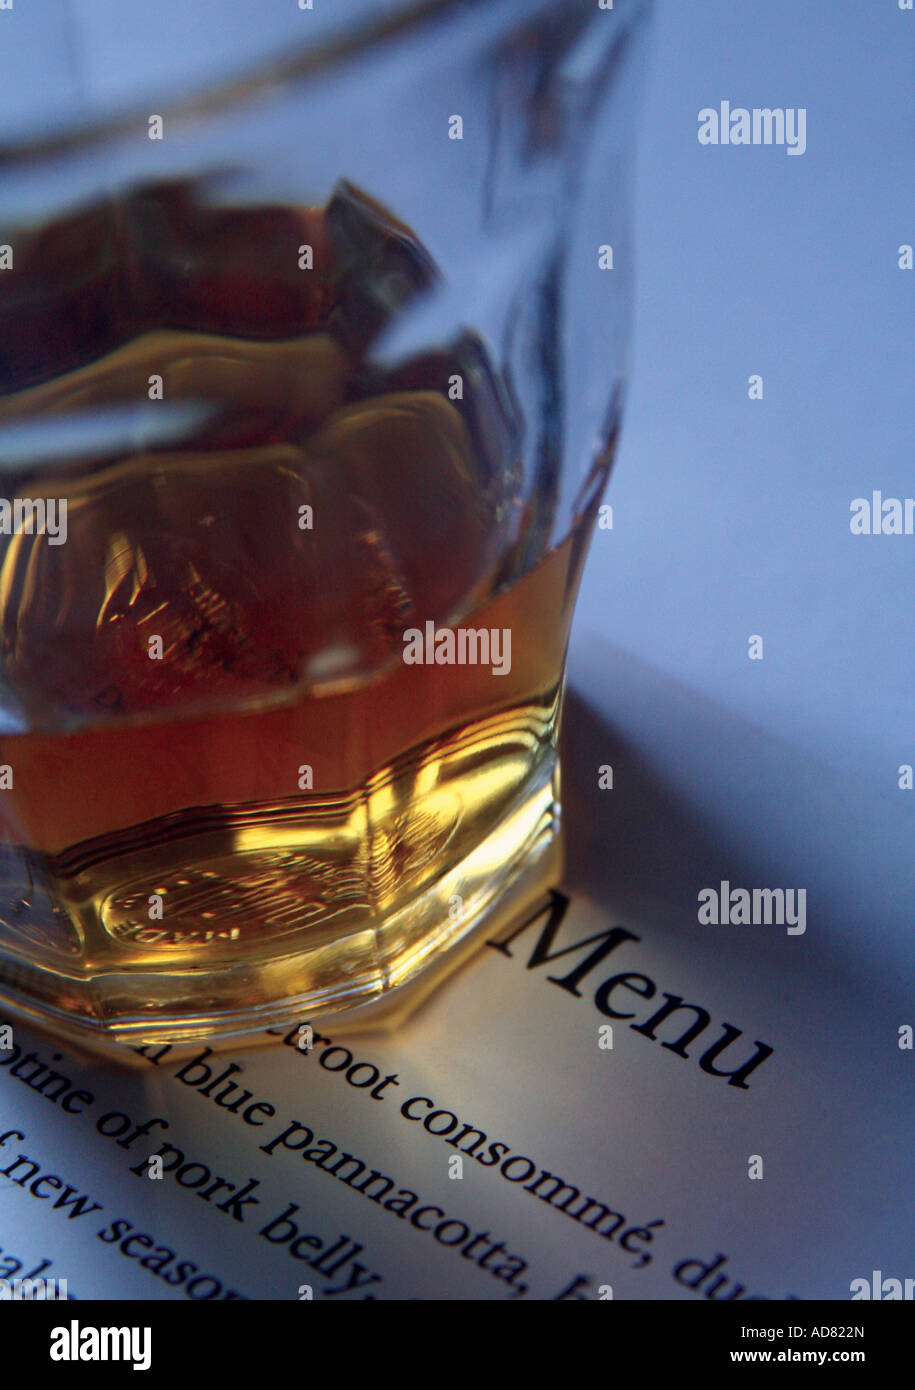 Glass of whisky on a restaurant menu Stock Photo